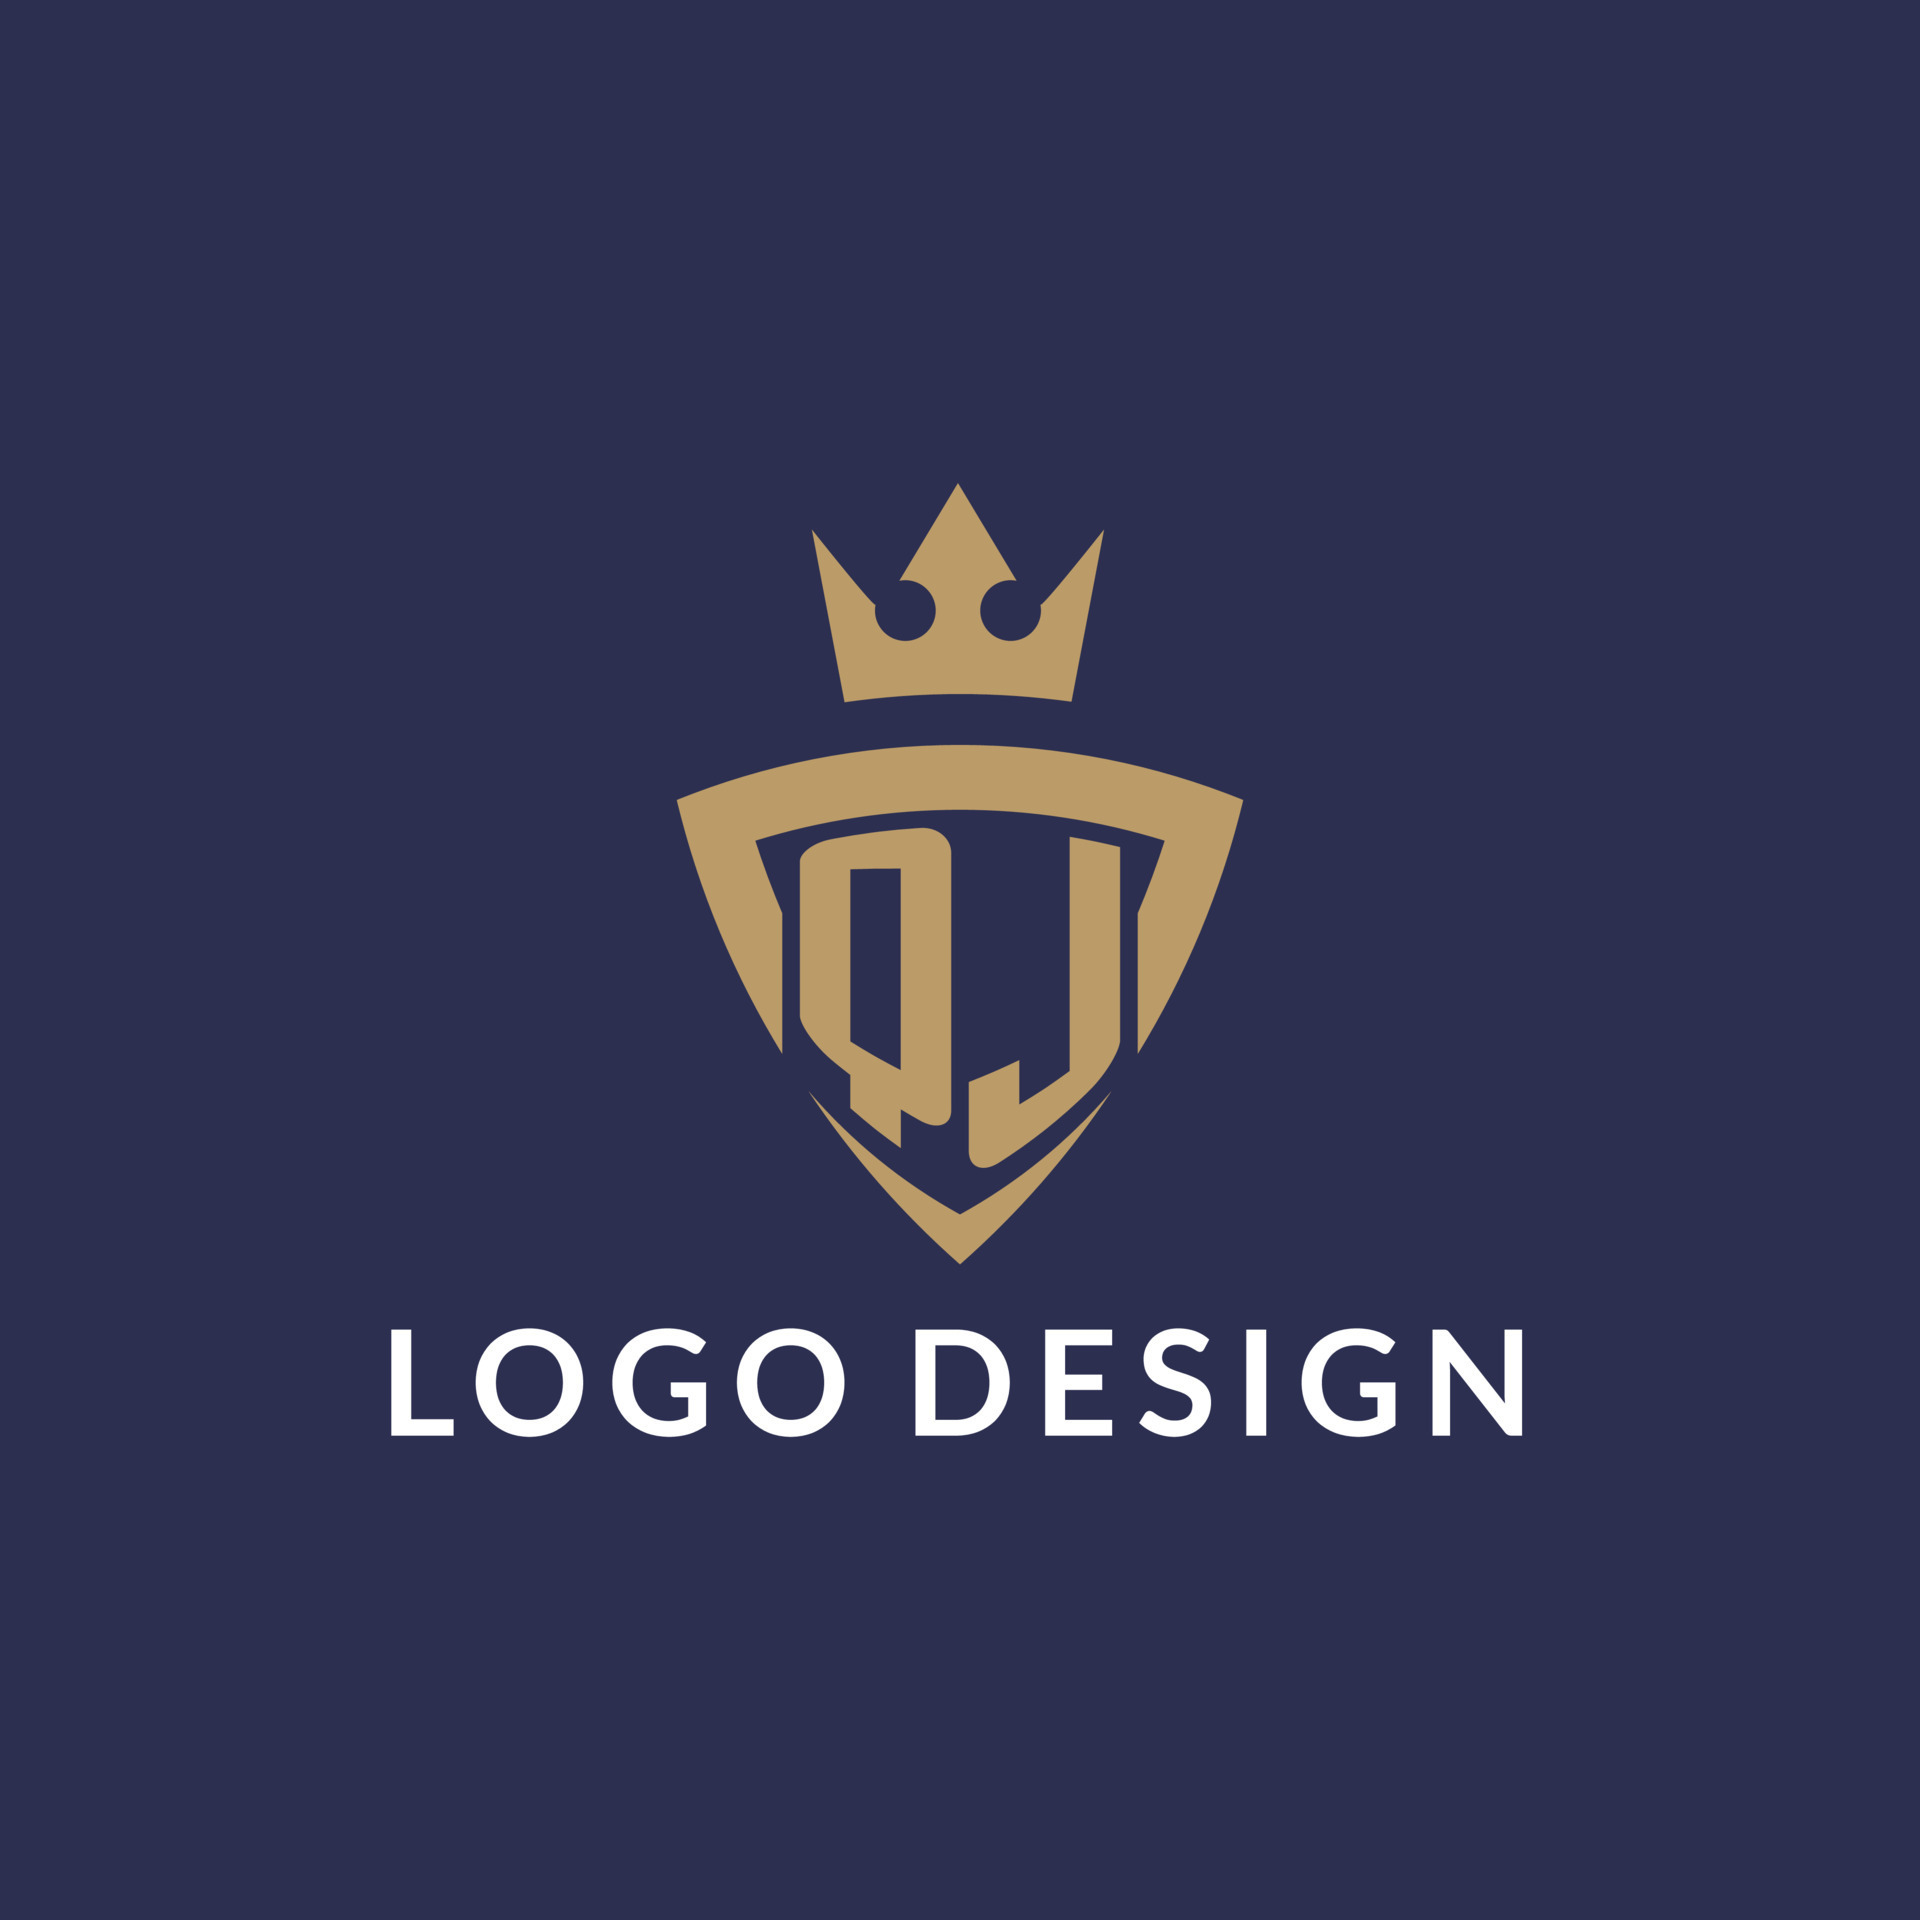 QJ logo with shield and crown, monogram initial logo style 23019145 ...